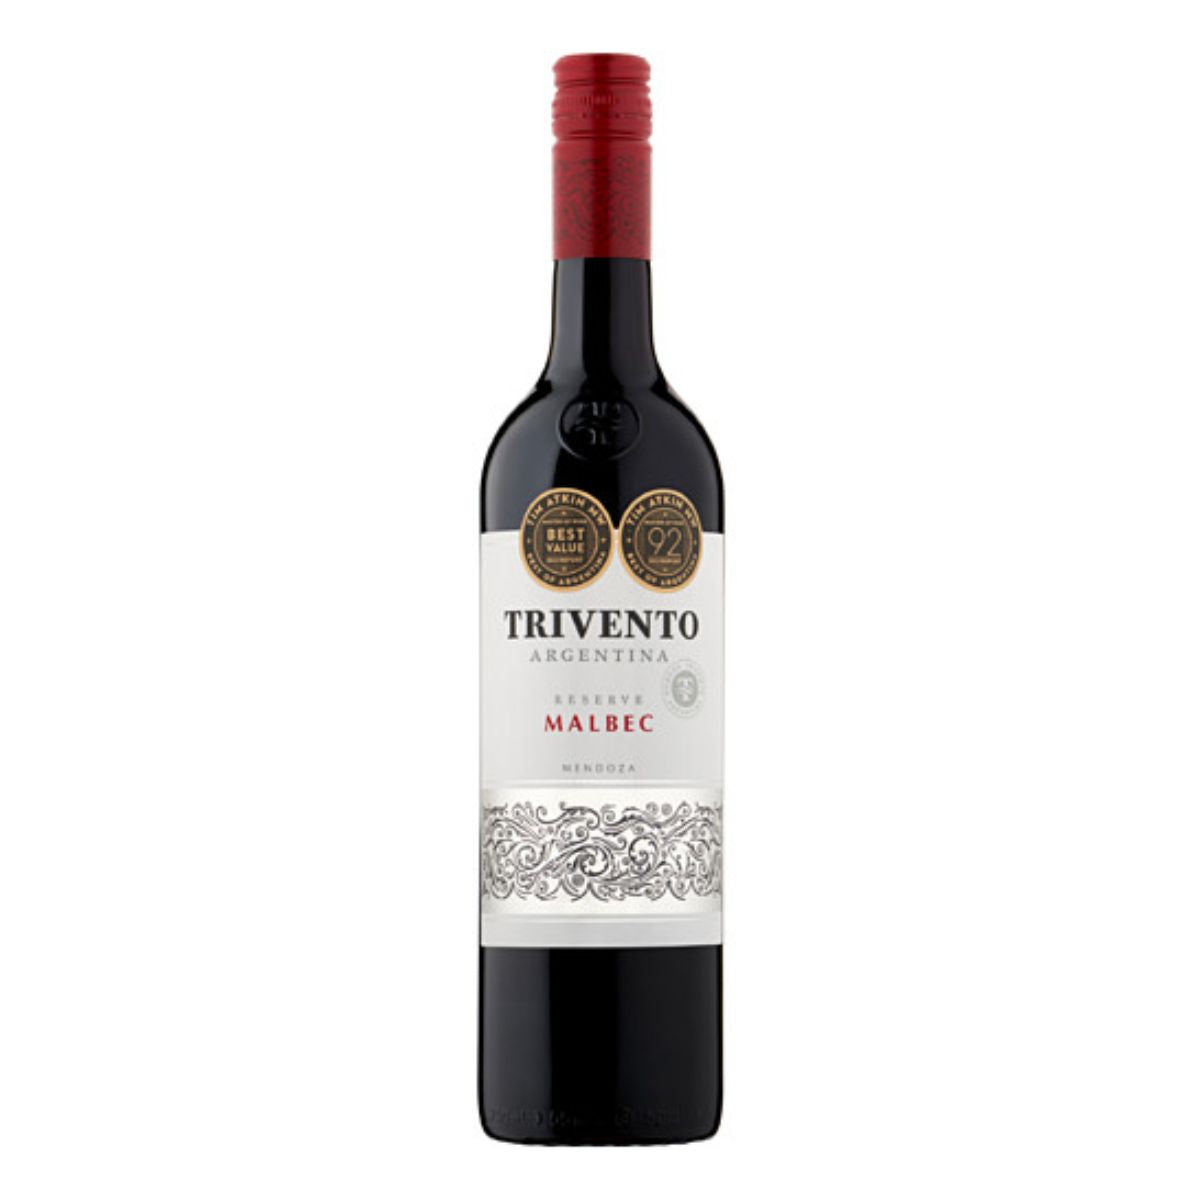 A bottle of Trivento - Private Reserve Malbec (14% ABV) - 750ml on a white background.